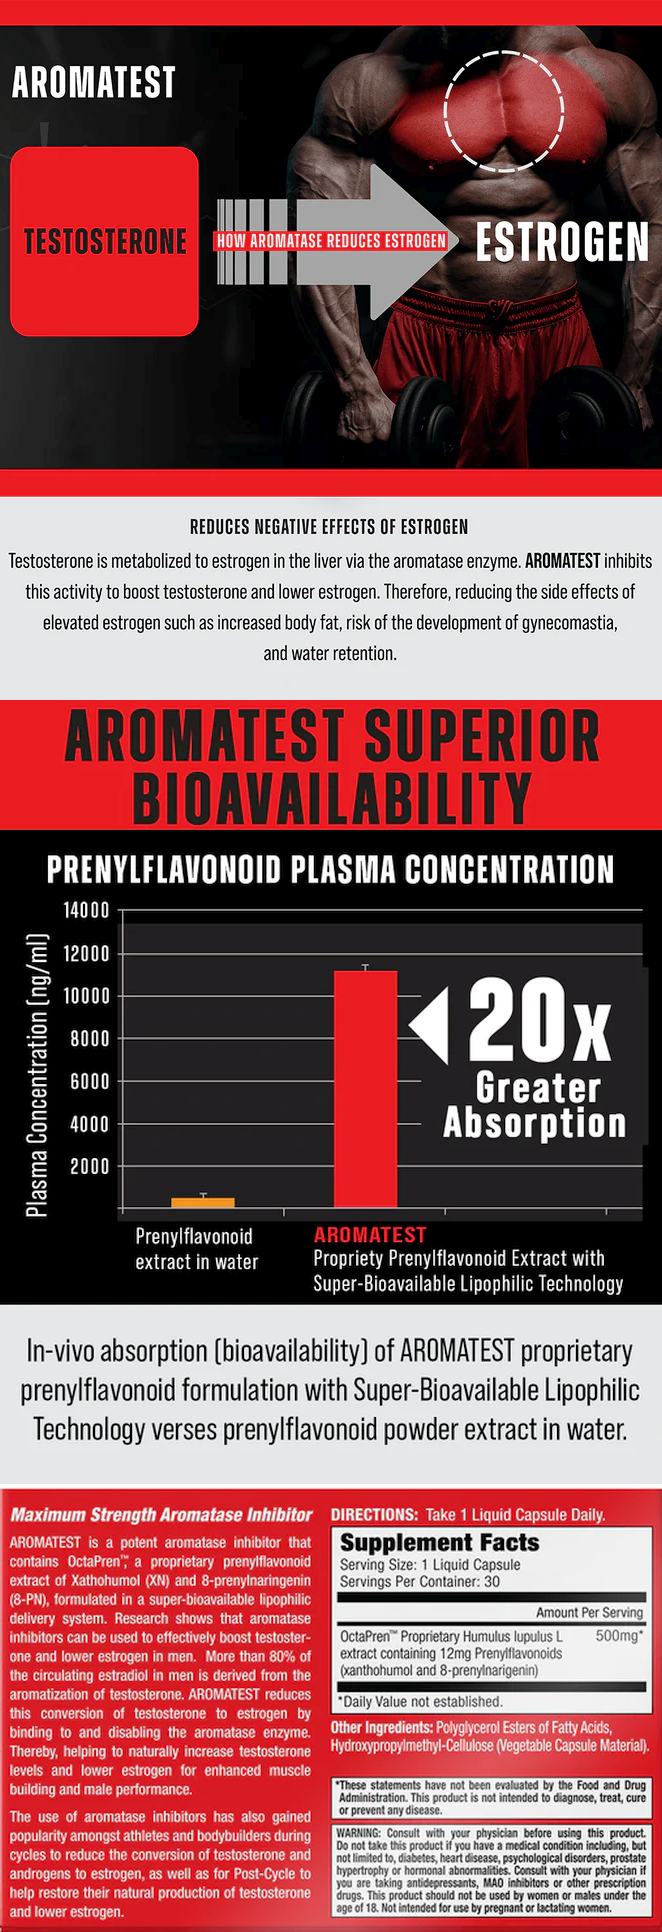 Visual of AROMATEST product details; highlights it inhibits conversion of testosterone to estrogen, enhancing muscle building and performance.